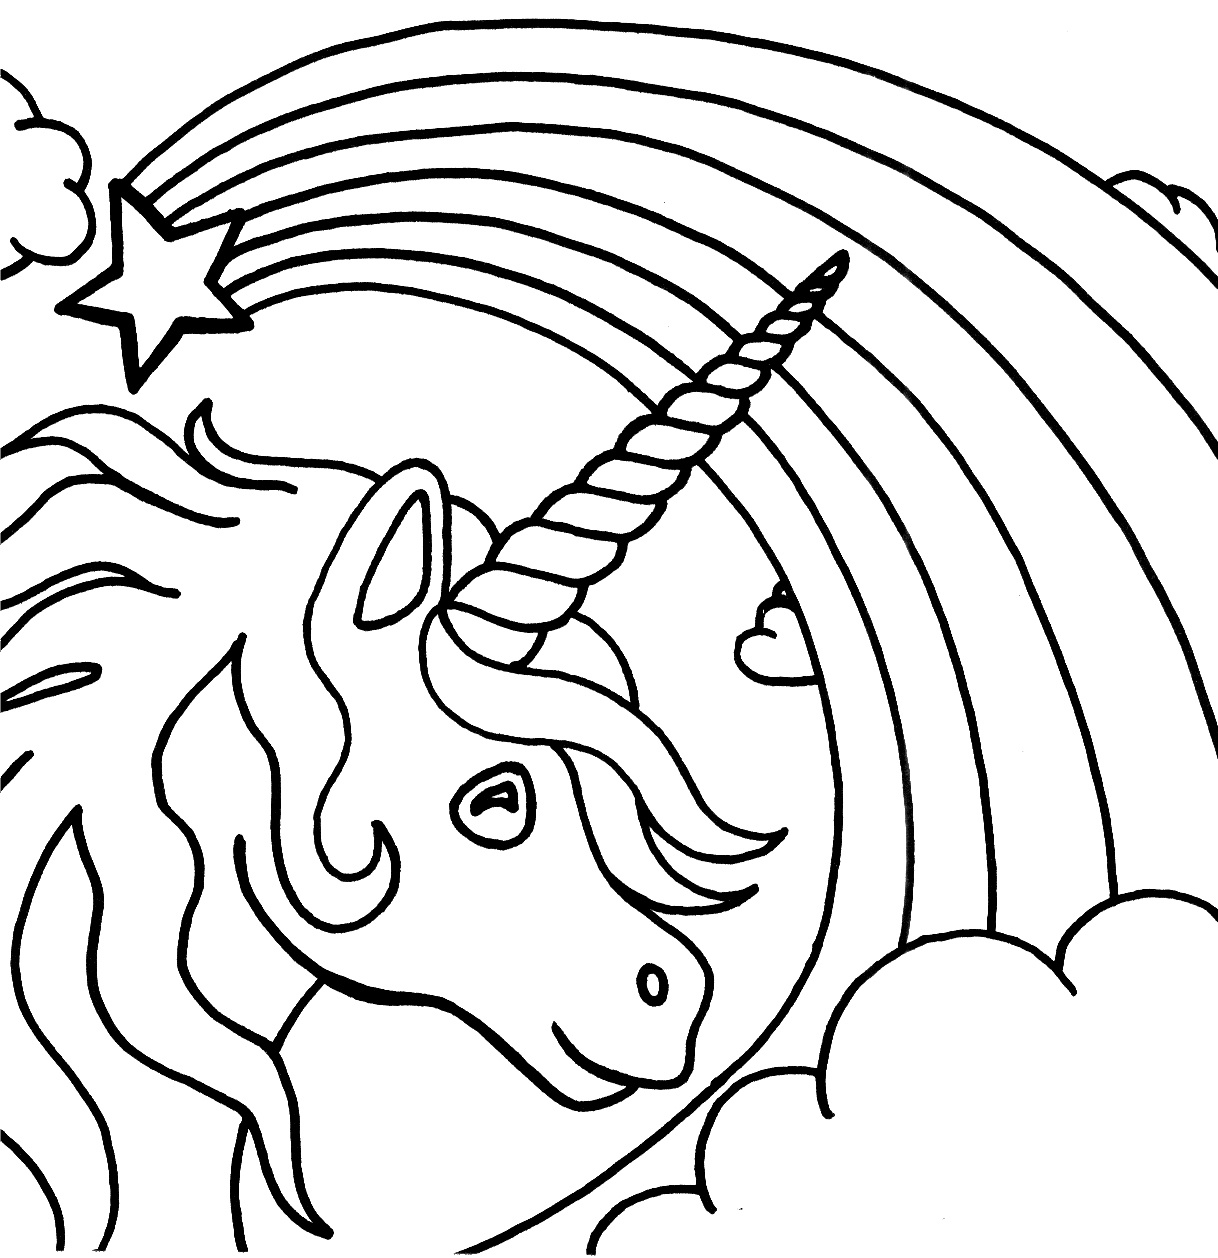 Free Printable Coloring Pages - Ez Coloring Pages - Www Free Printable Coloring Pages